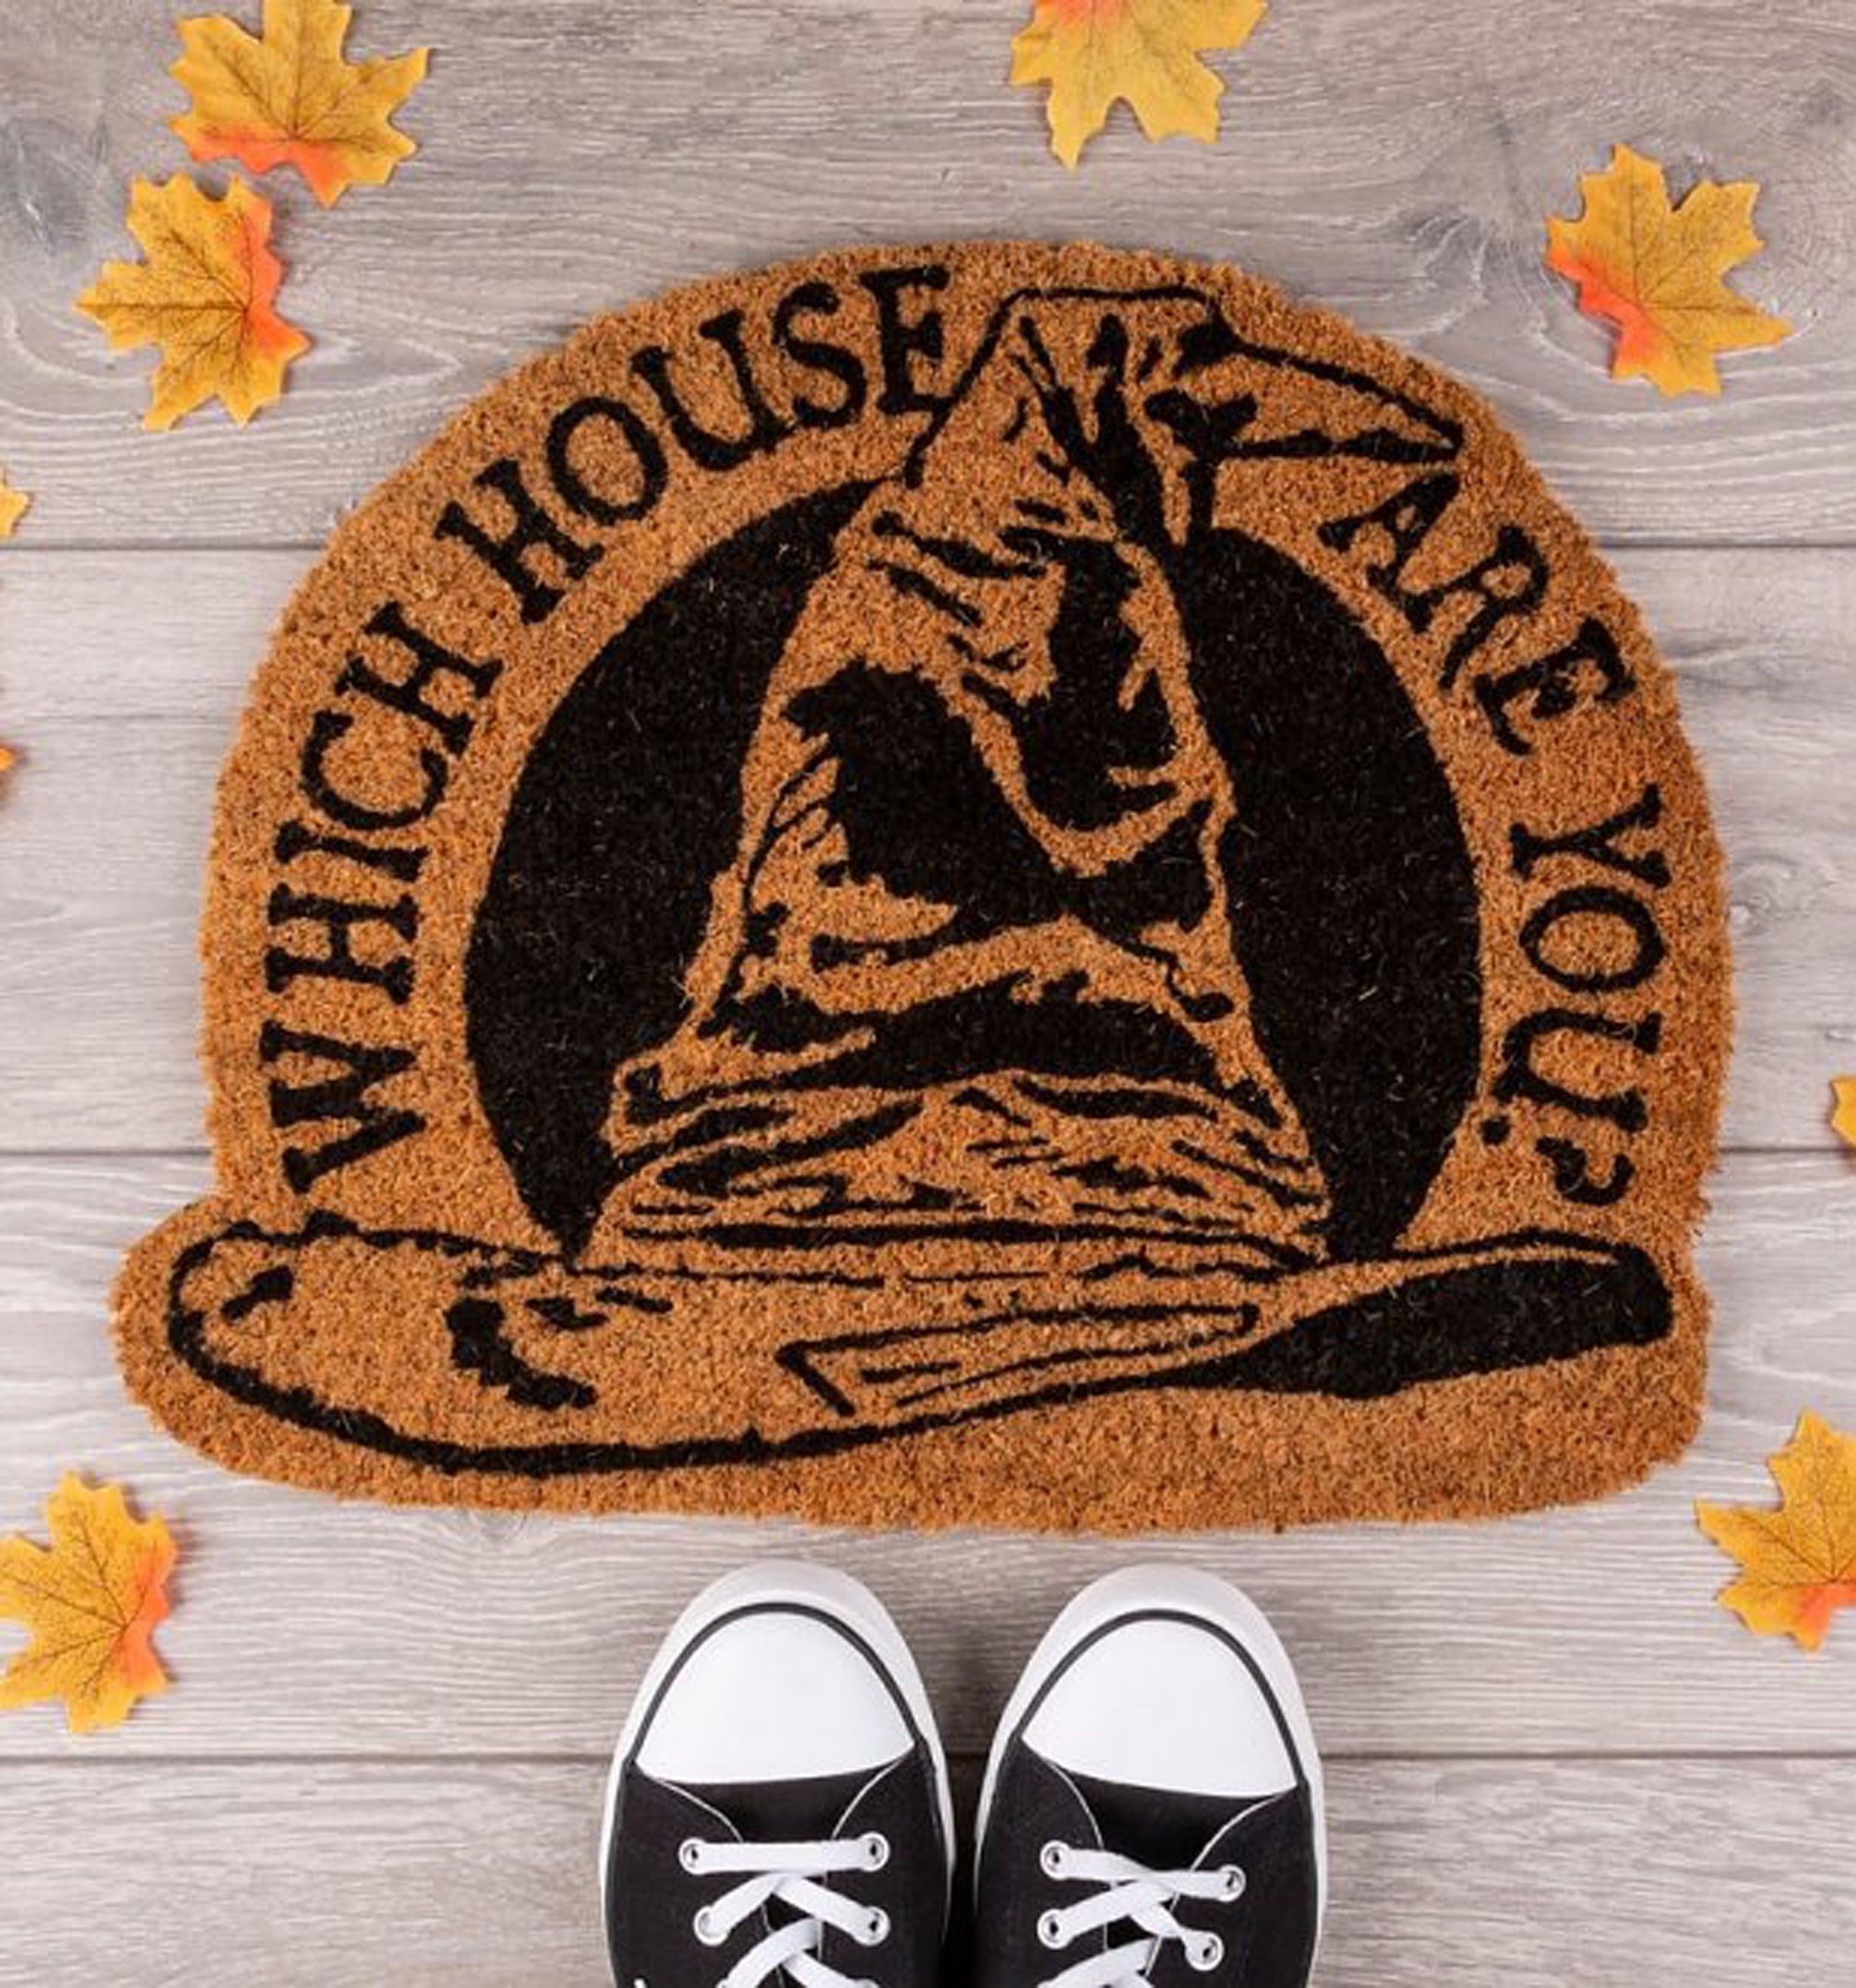 16 Pieces Of 'Harry Potter' Art Every Classy Muggle Needs In Their Apartment